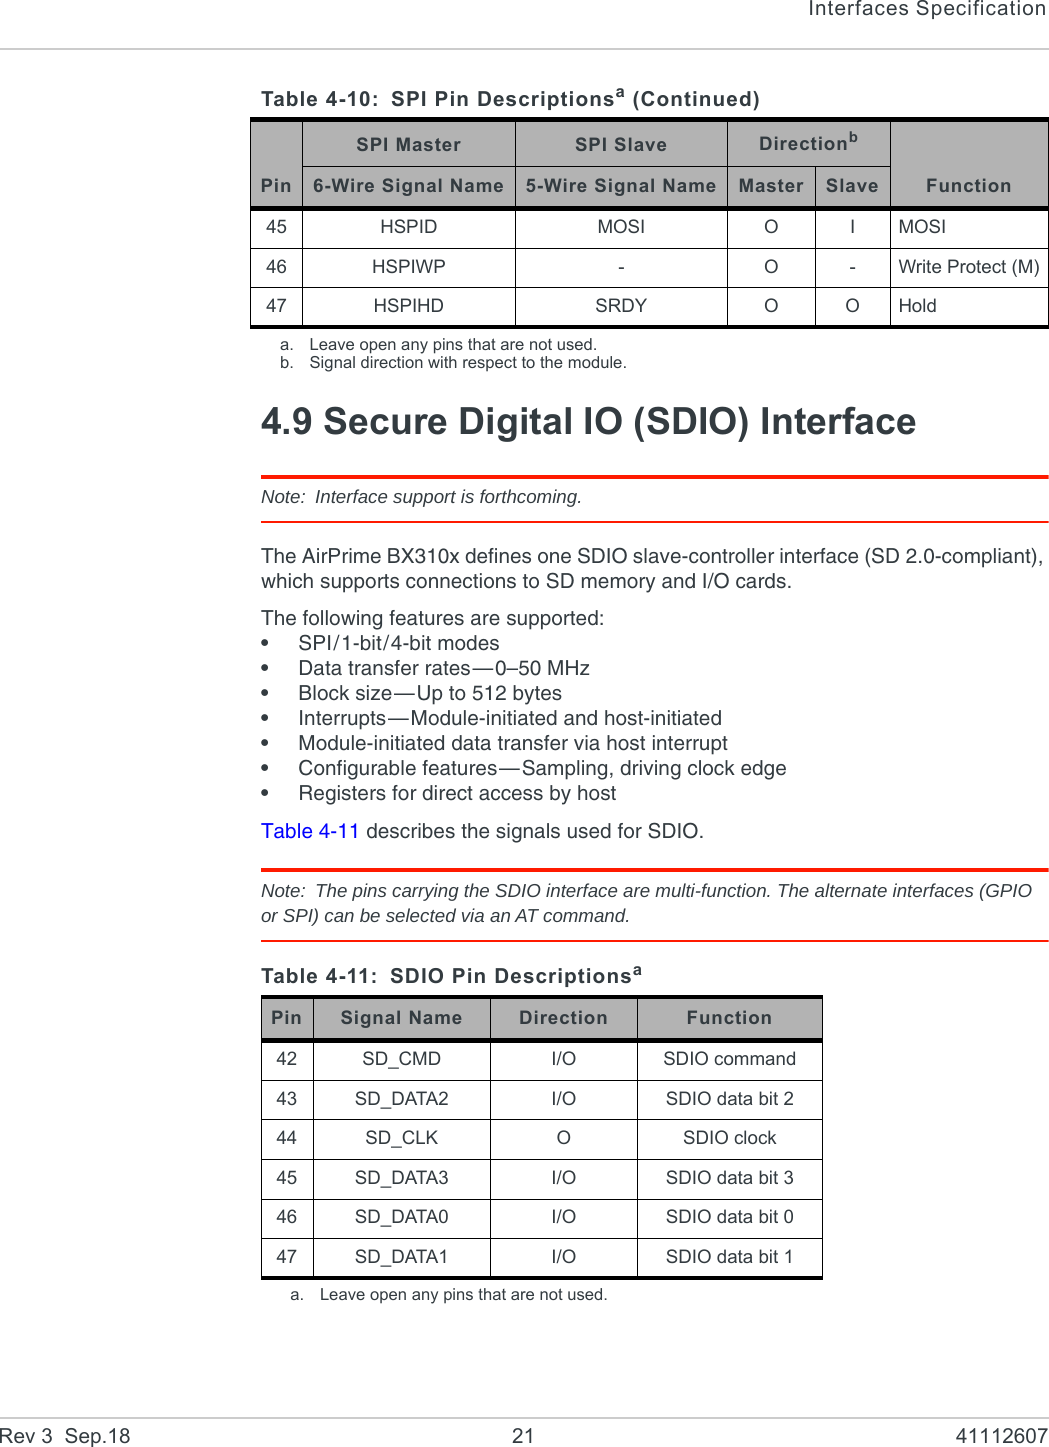 Interfaces SpecificationRev 3  Sep.18 21 411126074.9 Secure Digital IO (SDIO) InterfaceNote: Interface support is forthcoming.The AirPrime BX310x defines one SDIO slave-controller interface (SD 2.0-compliant), which supports connections to SD memory and I/O cards.The following features are supported:•SPI/1-bit/4-bit modes•Data transfer rates—0–50 MHz•Block size—Up to 512 bytes•Interrupts—Module-initiated and host-initiated•Module-initiated data transfer via host interrupt•Configurable features—Sampling, driving clock edge•Registers for direct access by hostTable 4-11 describes the signals used for SDIO.Note: The pins carrying the SDIO interface are multi-function. The alternate interfaces (GPIO or SPI) can be selected via an AT command.  45 HSPID MOSI O I MOSI46 HSPIWP - O - Write Protect (M)47 HSPIHD SRDY O O Holda. Leave open any pins that are not used.b. Signal direction with respect to the module.Table 4-11: SDIO Pin Descriptionsaa. Leave open any pins that are not used.Pin Signal Name Direction Function42 SD_CMD I/O SDIO command43 SD_DATA2 I/O SDIO data bit 244 SD_CLK OSDIO clock45 SD_DATA3 I/O SDIO data bit 346 SD_DATA0 I/O SDIO data bit 047 SD_DATA1 I/O SDIO data bit 1Table 4-10: SPI Pin Descriptionsa (Continued)PinSPI Master SPI Slave DirectionbFunction6-Wire Signal Name 5-Wire Signal Name Master Slave